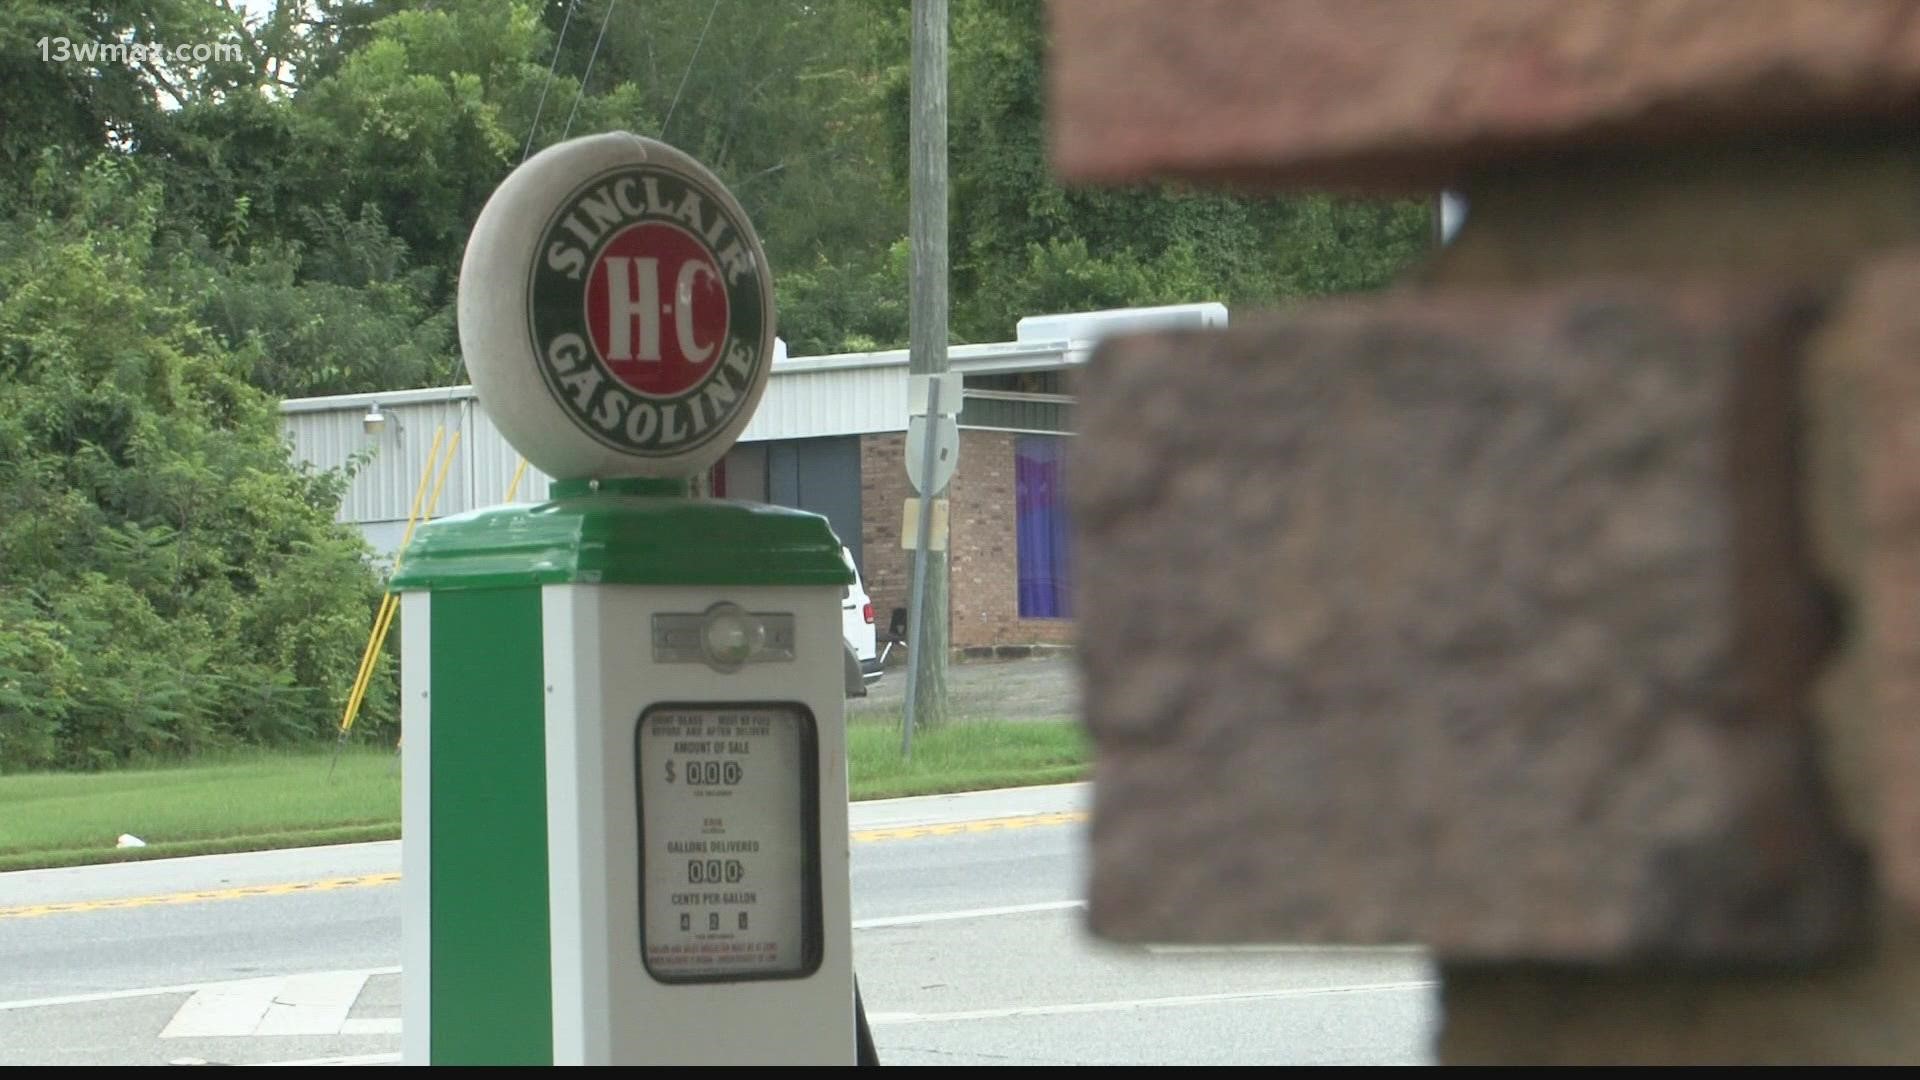 More than 80 years ago, a Perry native built what was then a state-of-the-art gas station.